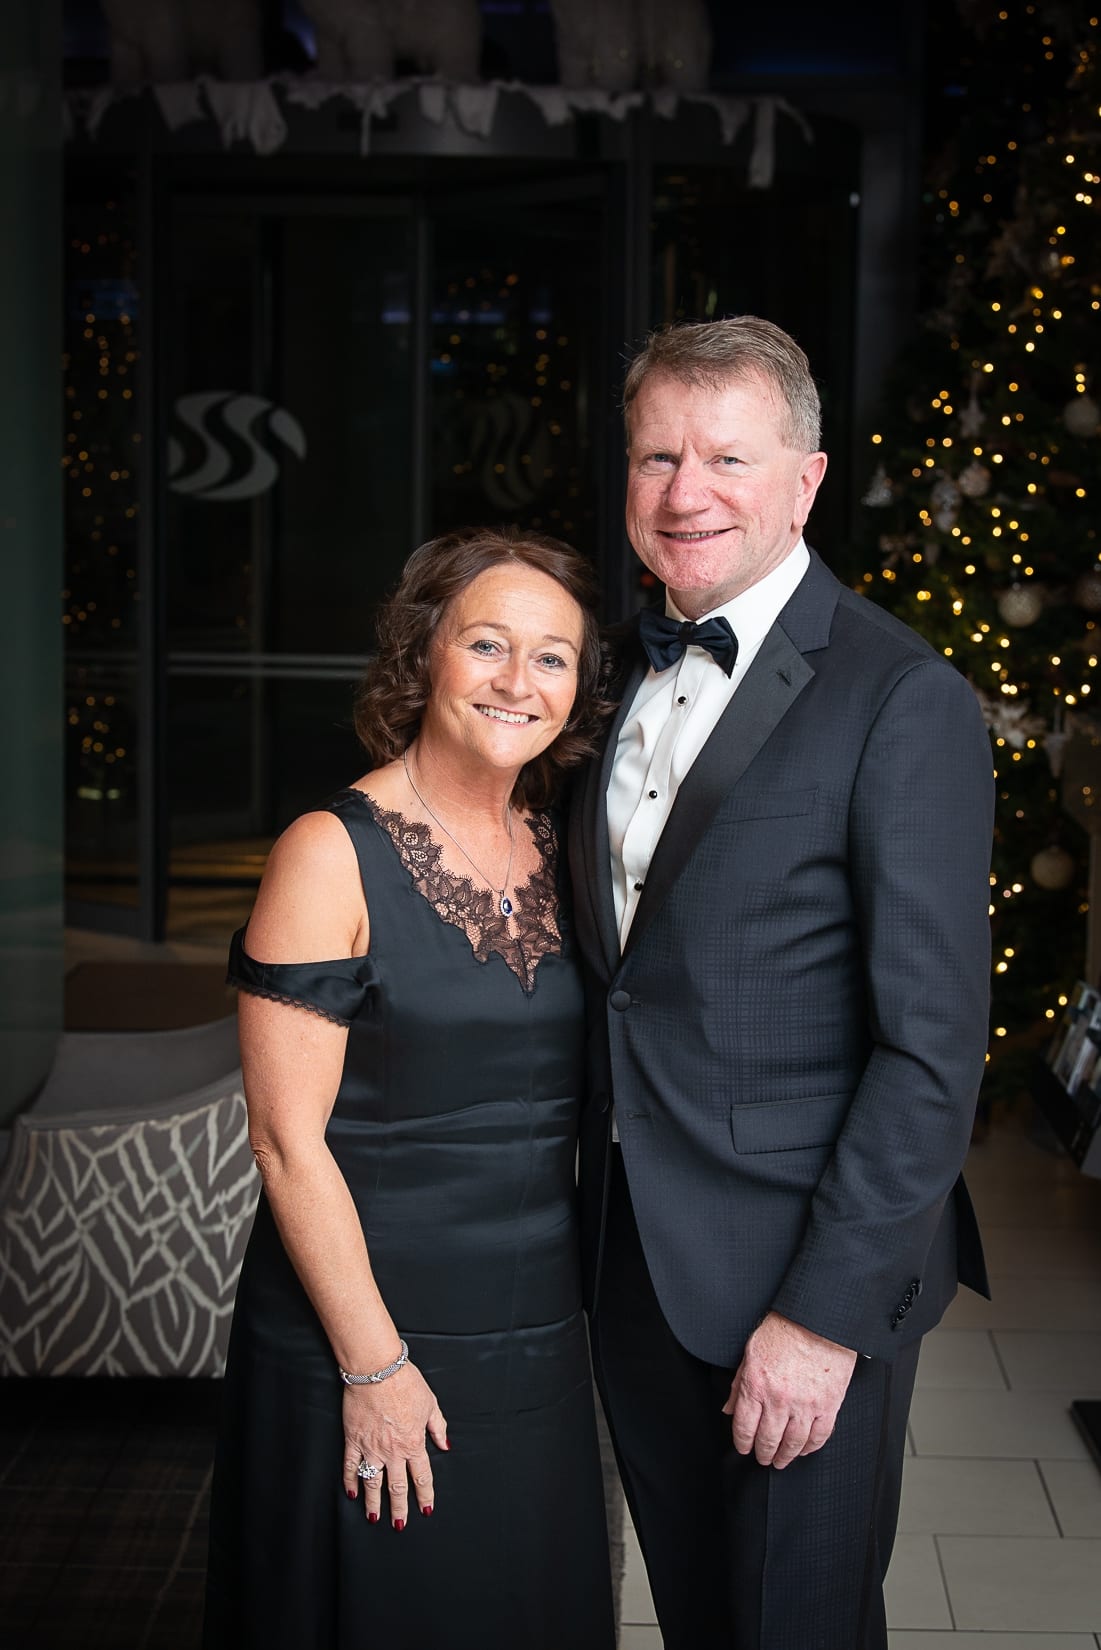 No repro fee-Limerick Chamber President’s Dinner
and Limerick Chamber Regional Business Awards 2019 which was held in the Strand Hotel on Friday 15th November /President Award/  - From Left to Right: Fionnola and Dr Hugh O’Donnell - WINNER / Ingenium Training and Consultancy,
Photo credit Shauna Kennedy